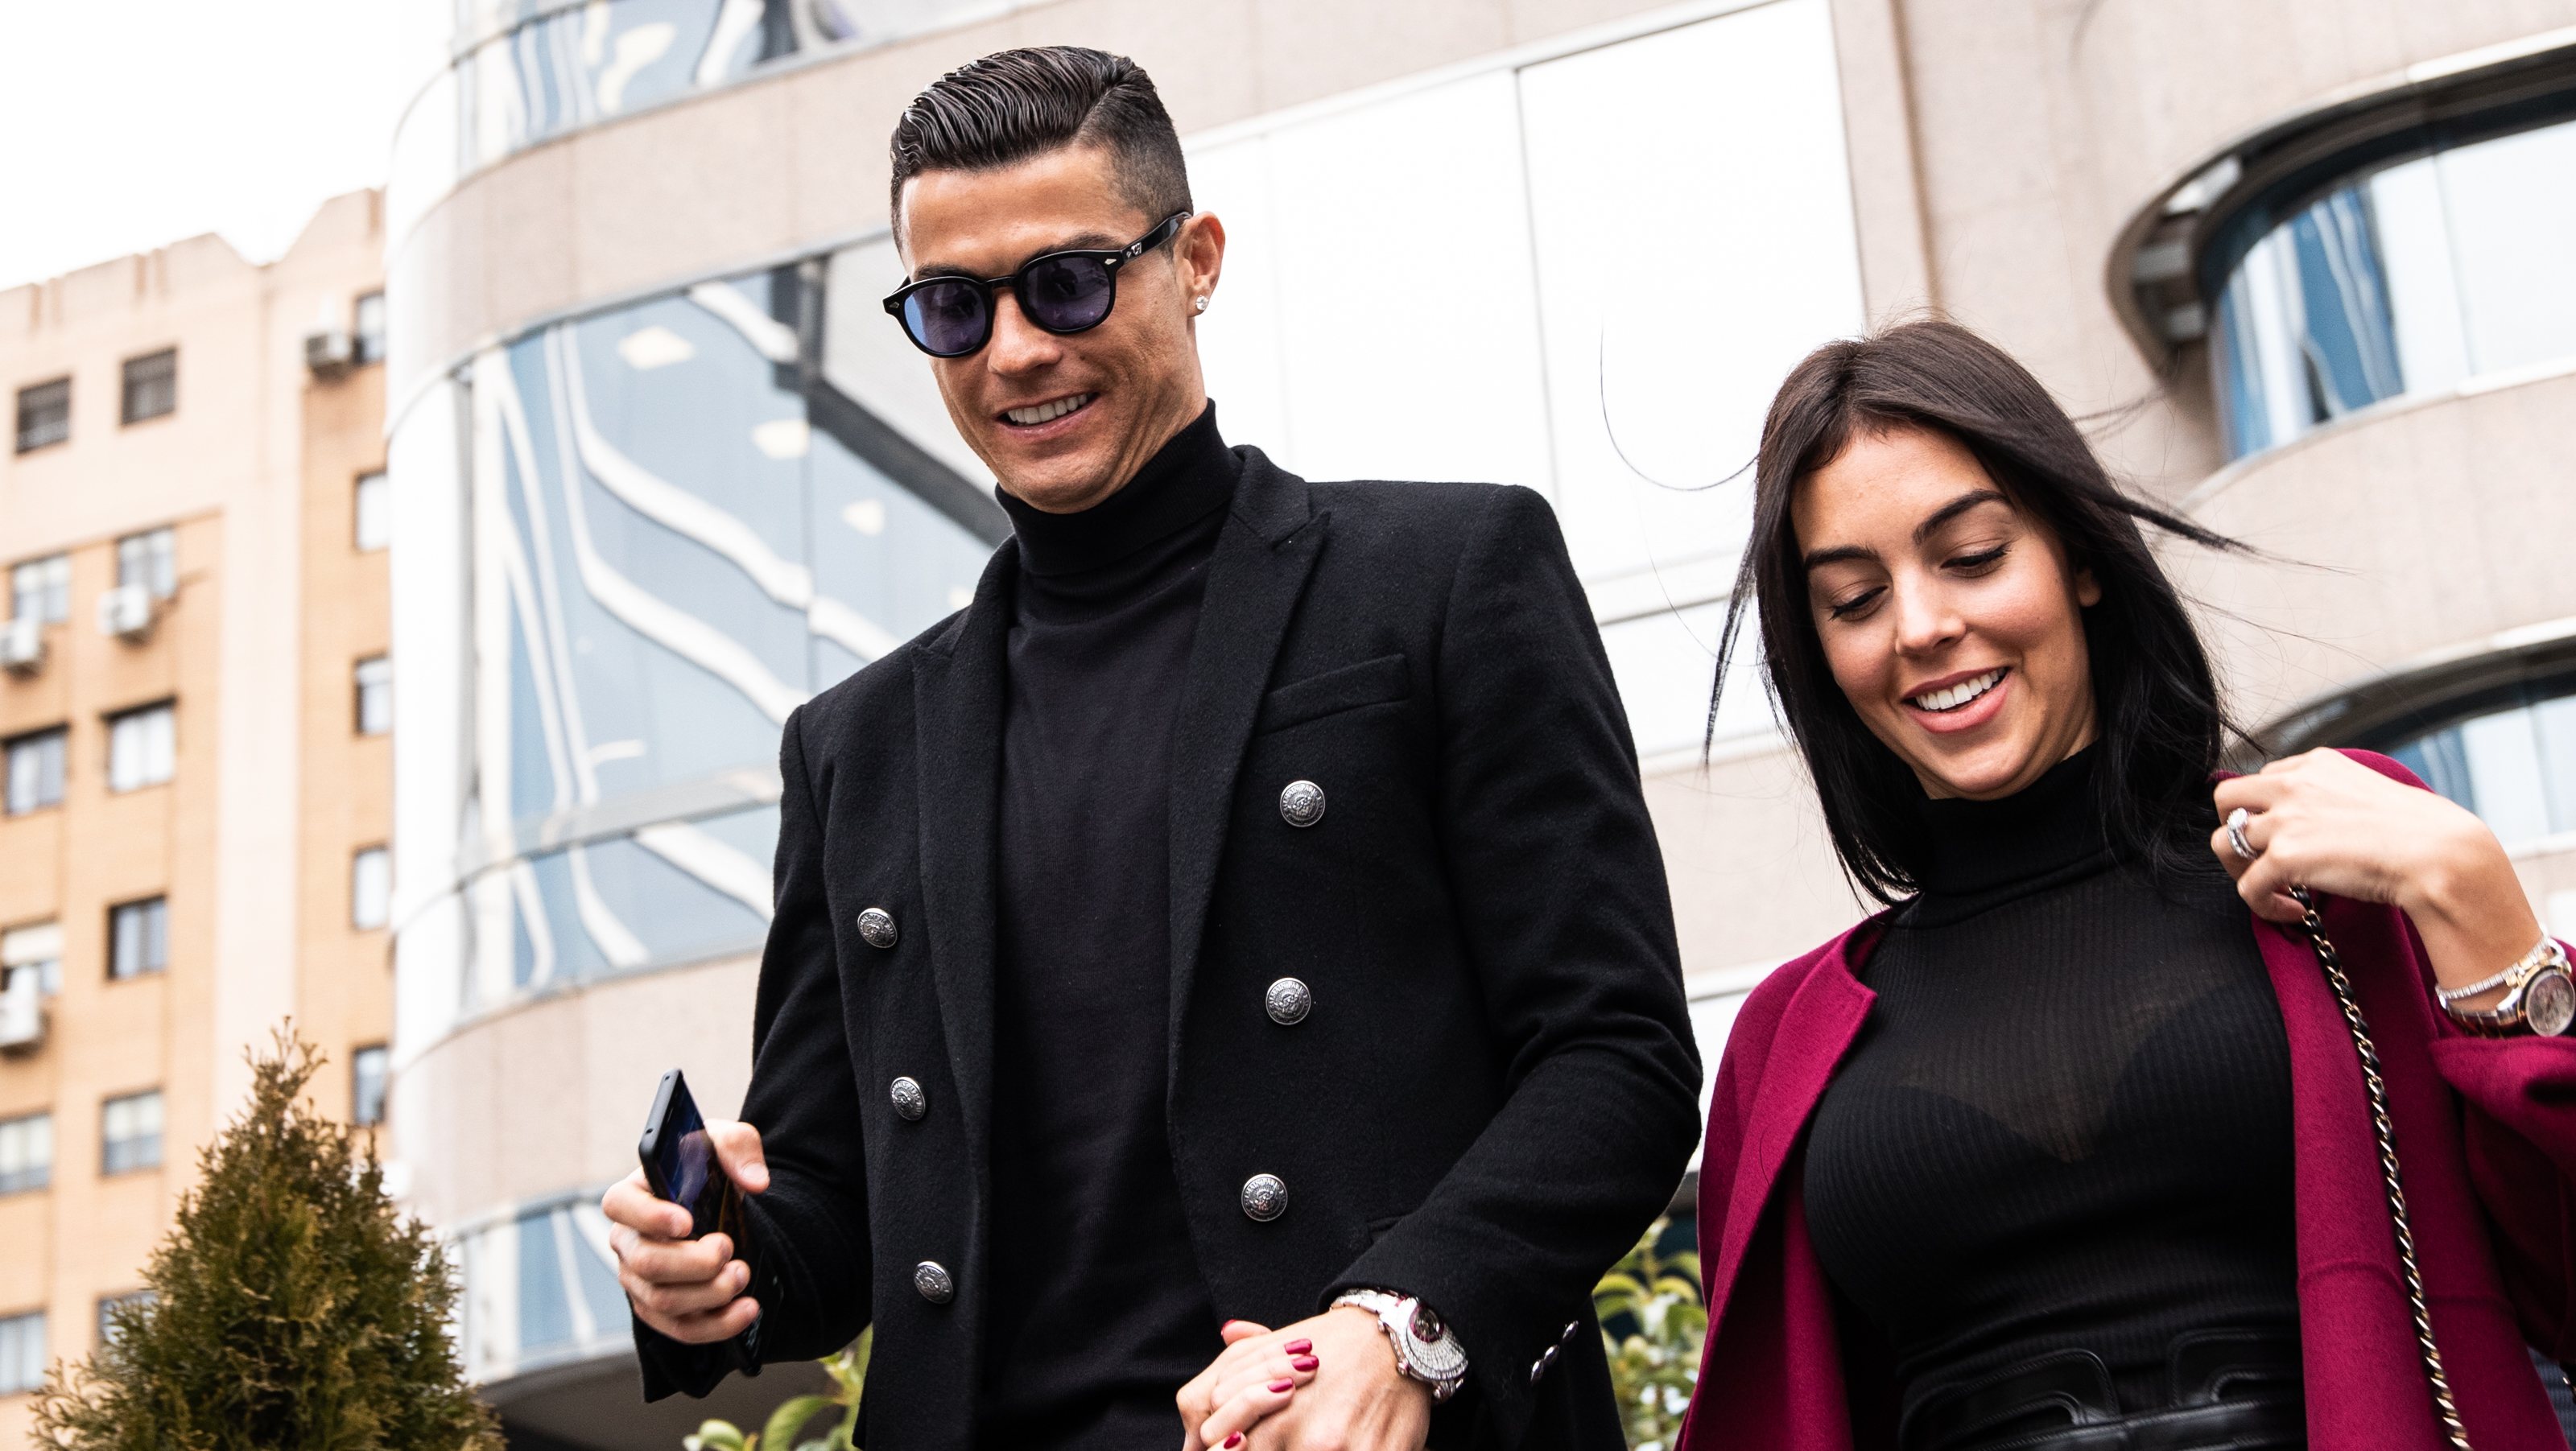 Portuguese soccer player Cristiano Ronaldo leaves from the